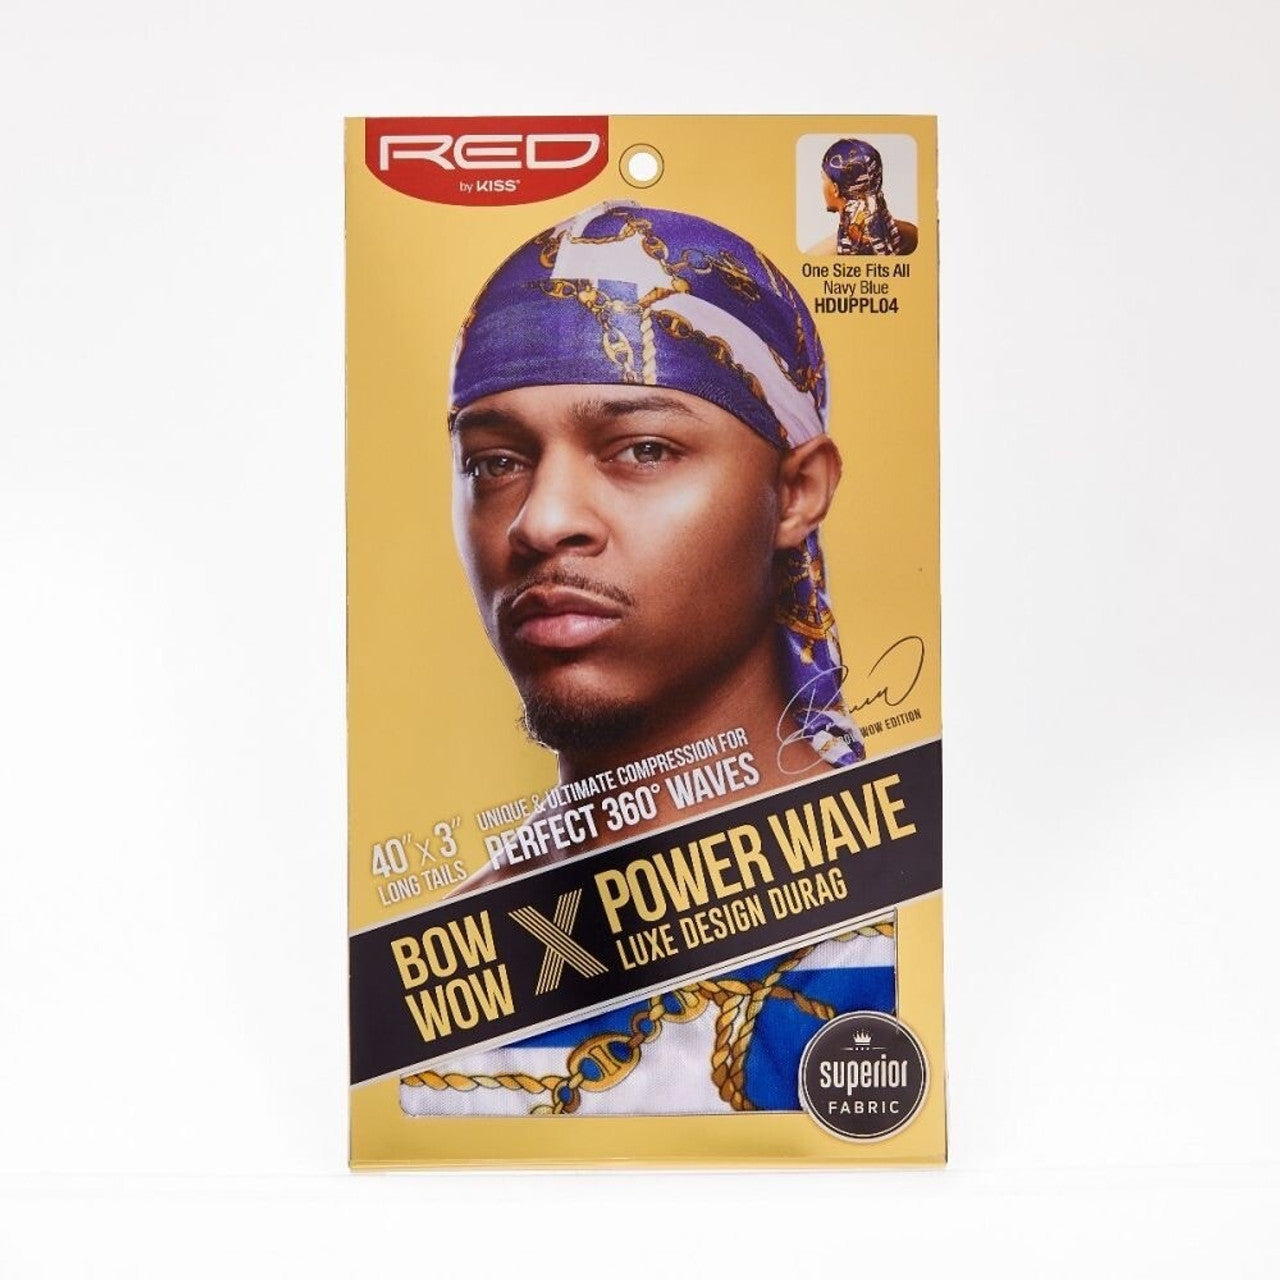 Red by Kiss Bow Wow X Power Wave Luxe Design Durag - Navy Blue - #HDUPPL04